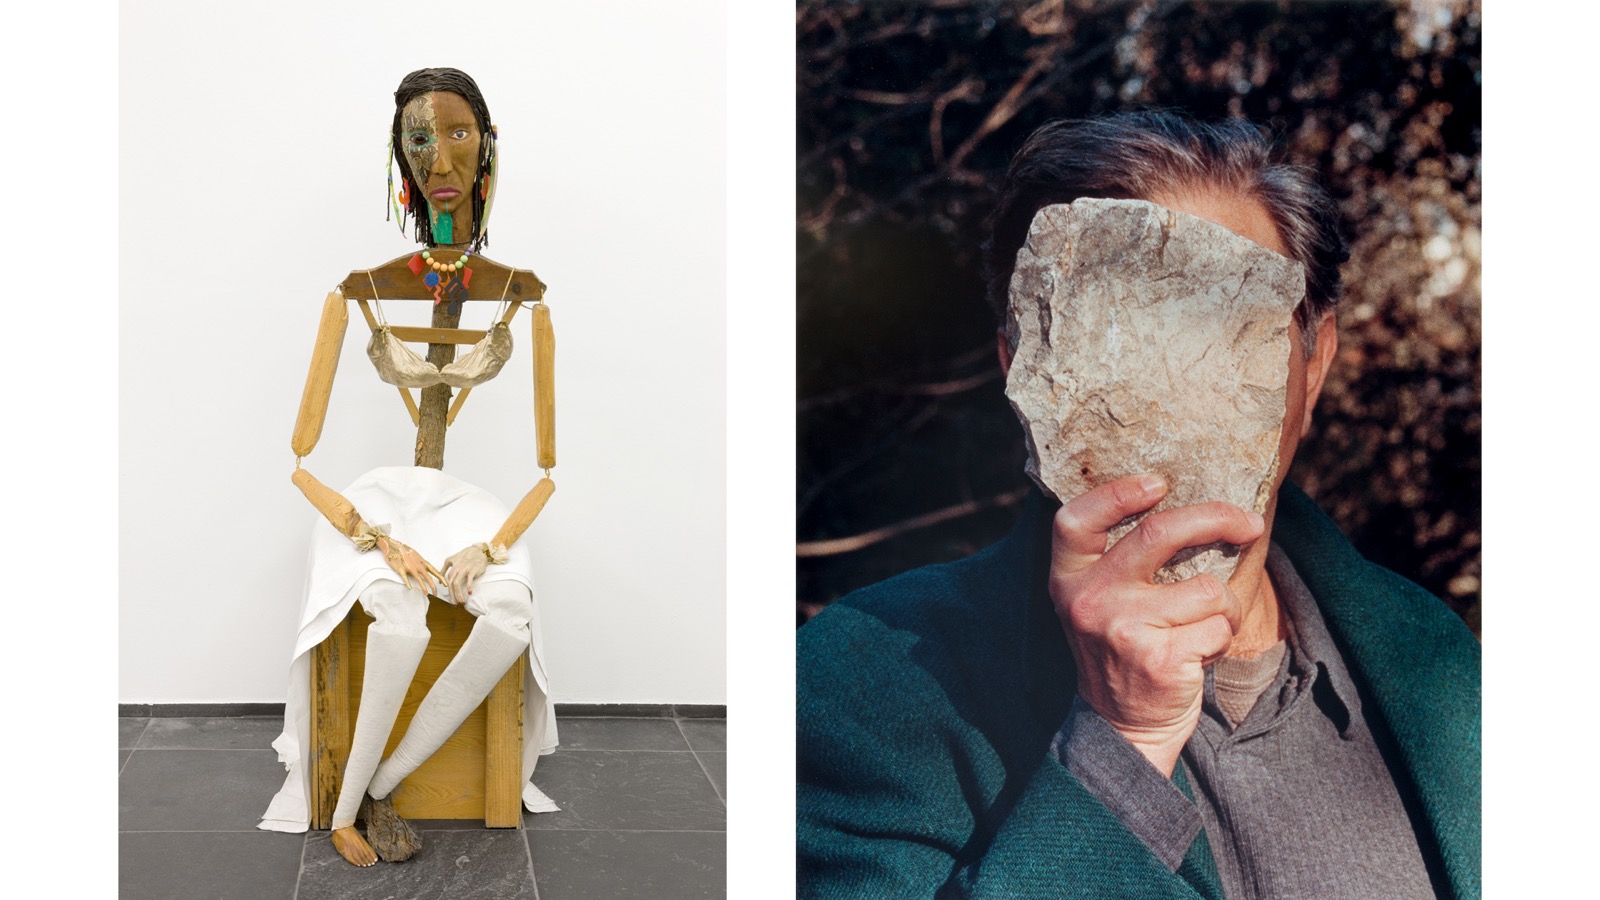 Left: Jimmie Durham, Malinche, 1988-1992. Guava, pine branches, oak, snakeskin, , polyester bra soaked in acrylic resin and painted gold, watercolor, cactus leaf, canvas, cotton cloth, metal, rope, feathers, plastic jewelry, glass eye. 70 u00d7 23 u215d u00d7 35 in. (177 u00d7 60 u00d7 89 cm). Stedelijk Museum voor Actuele Kunst (SMAK), Ghent, Belgium. Image u00a9S.M.A.K. / Dirk Pauwels.Right: Jimmie Durham, Self-Portrait Pretending to Be a Stone Statue of Myself, 2006. Color photograph. Edition of 1 + 1 AP. 31 u00be u00d7 24 in. (80.7 u00d7 60.9 cm). Collection of fluid archives, Karlsruhe. Courtesy of ZKM Center for Art and Media, Karlsruhe.